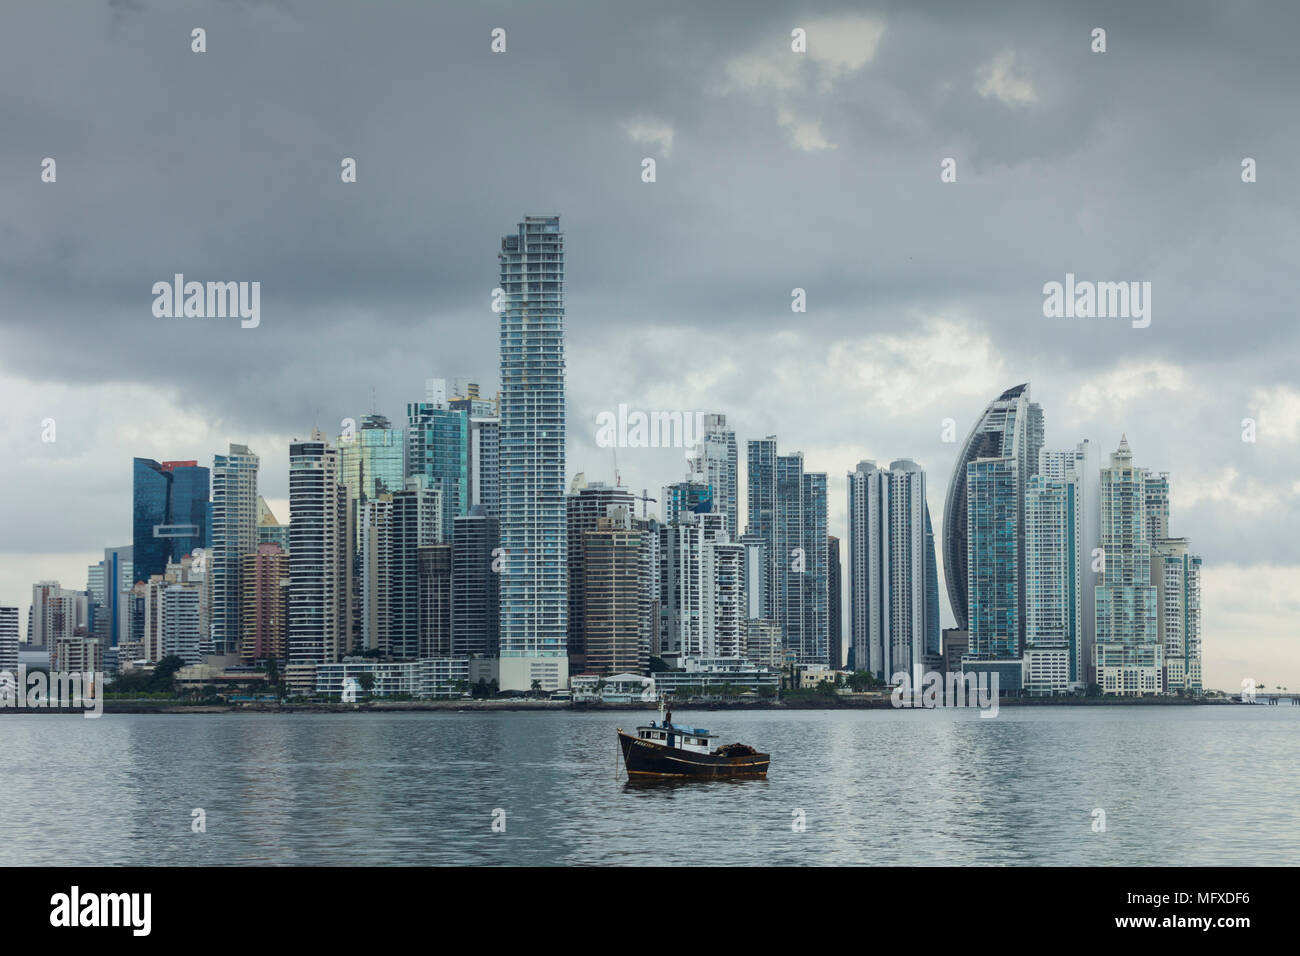 The high-rise buildings of modern Panama City, Panama, with a small fishing boat in the foreground Stock Photo